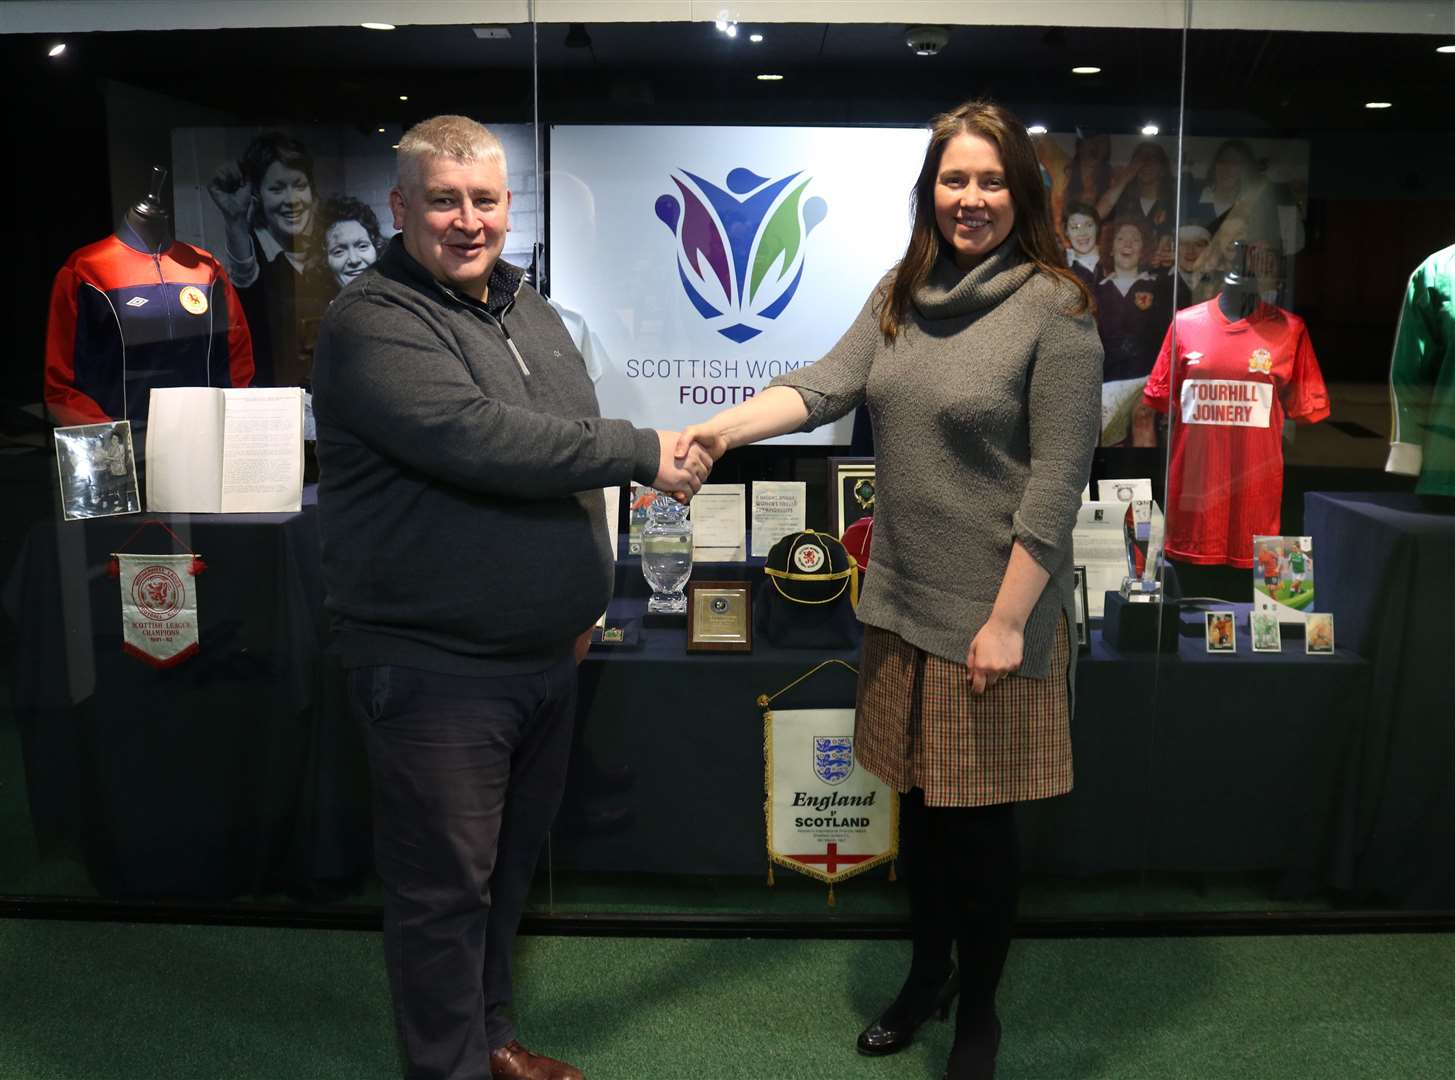 SWF Chief Executive Aileen Campbell and interim Chief Executive of the Scottish Football Partnership Trust Neal Ross at the 150 Years of Football exhibition in the Scottish Football Museum, Hampden which marks 50 years of Scottish Women’s Football.